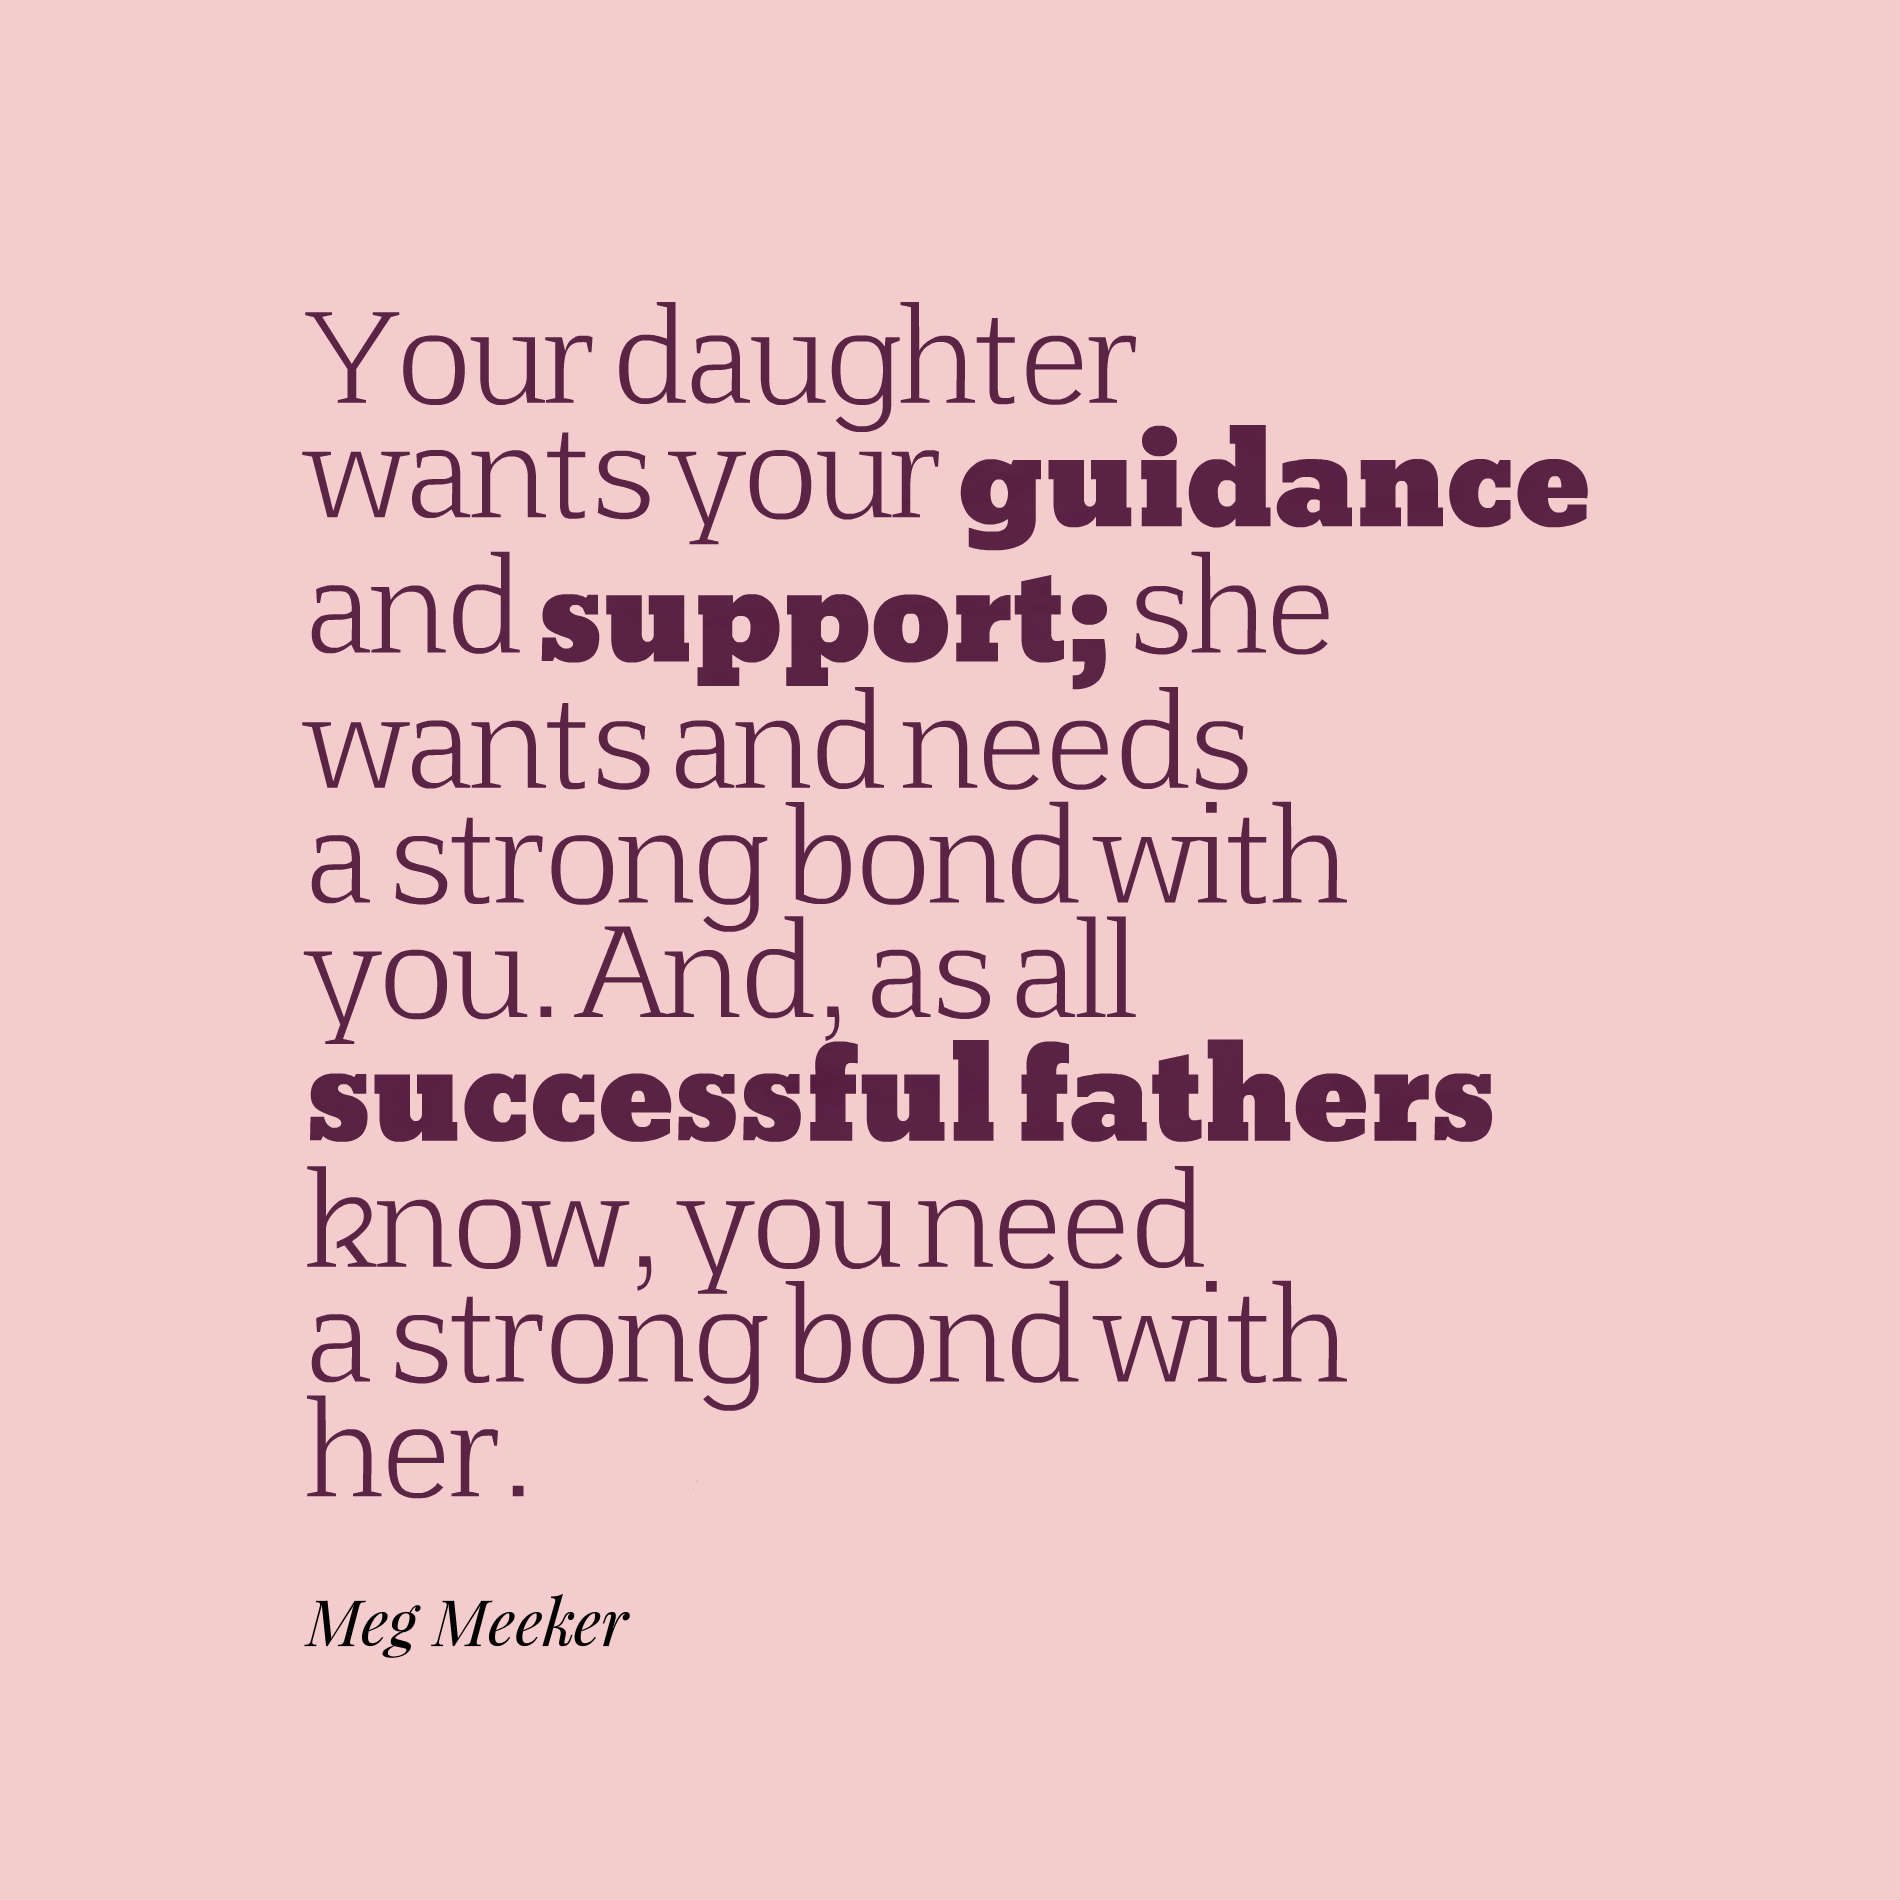 Your daughter wants your guidance and support; she wants and needs a strong bond with you. And, as all successful fathers know, you need a strong bond with her.